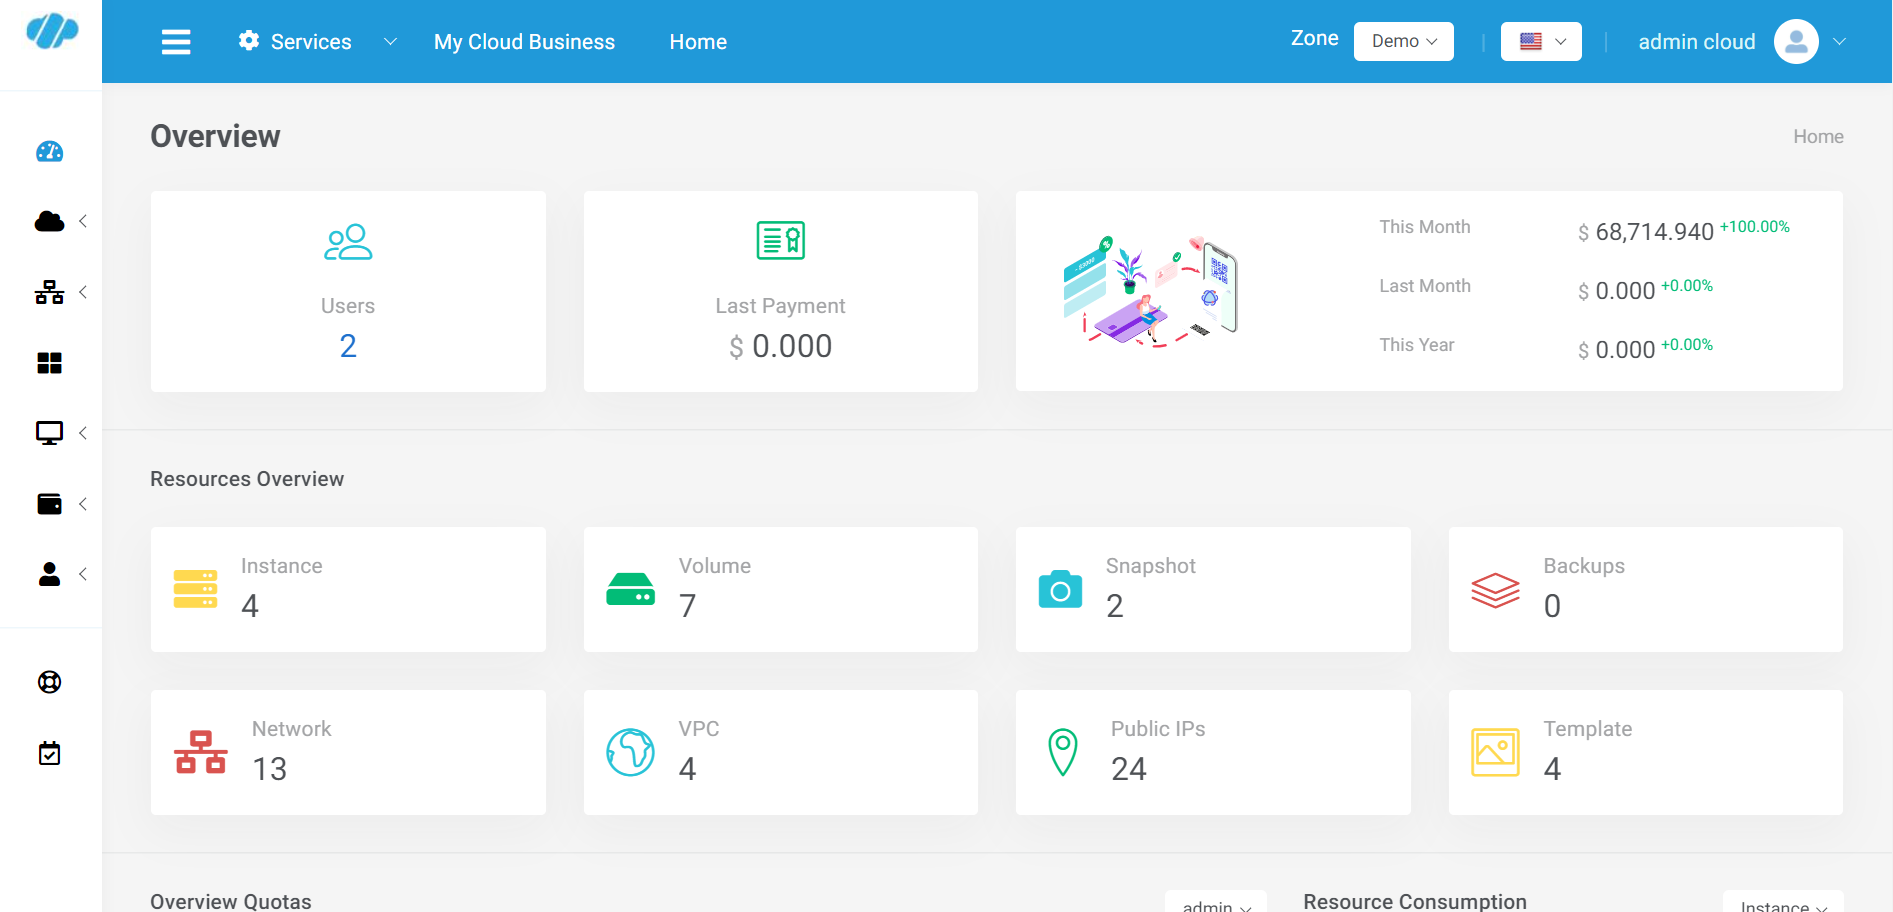 Centralized Dashboard enables you to view the Overall Resource and Cost Consumption